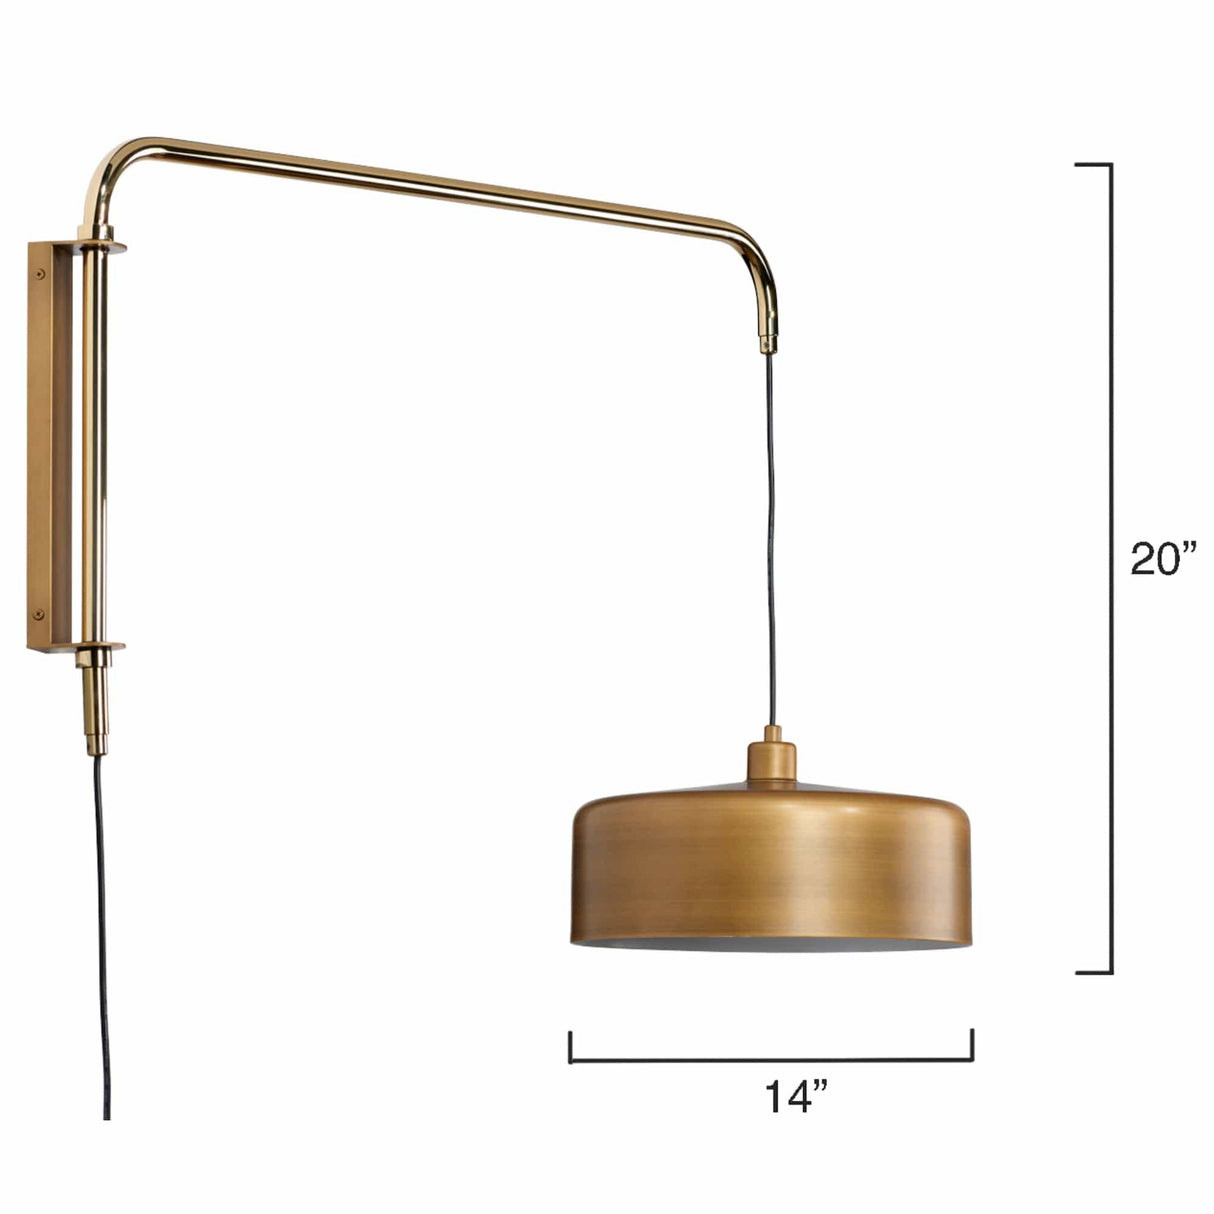 Jamie Young Co. Jeno Swing Arm Wall Sconce Lighting